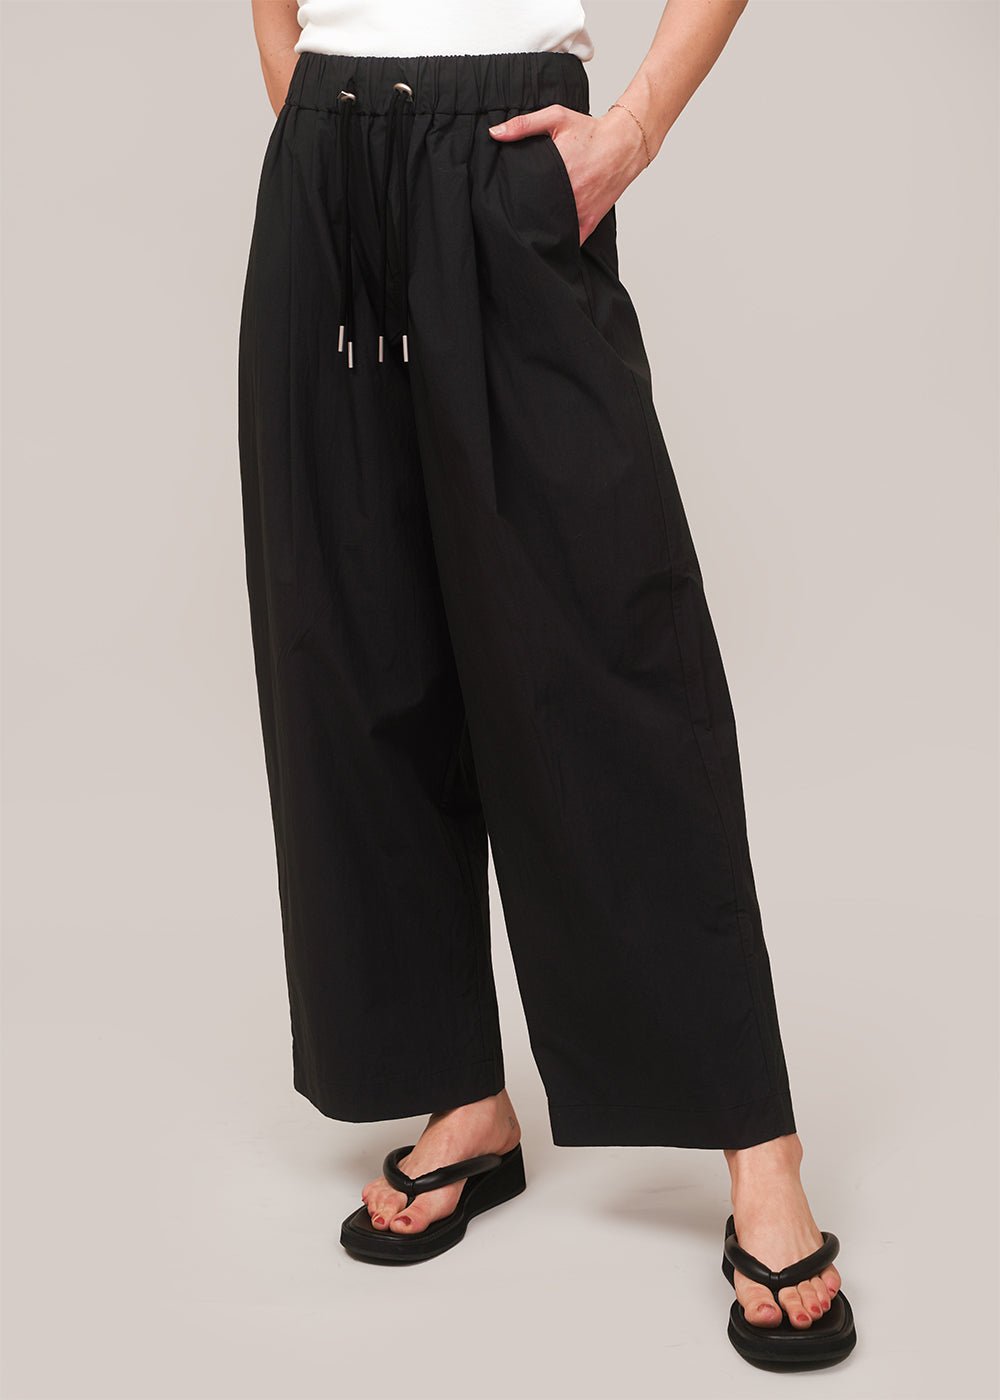 Fundamental T in Cafe au Lait & Relaxed Fit Belted Stretch Pant in